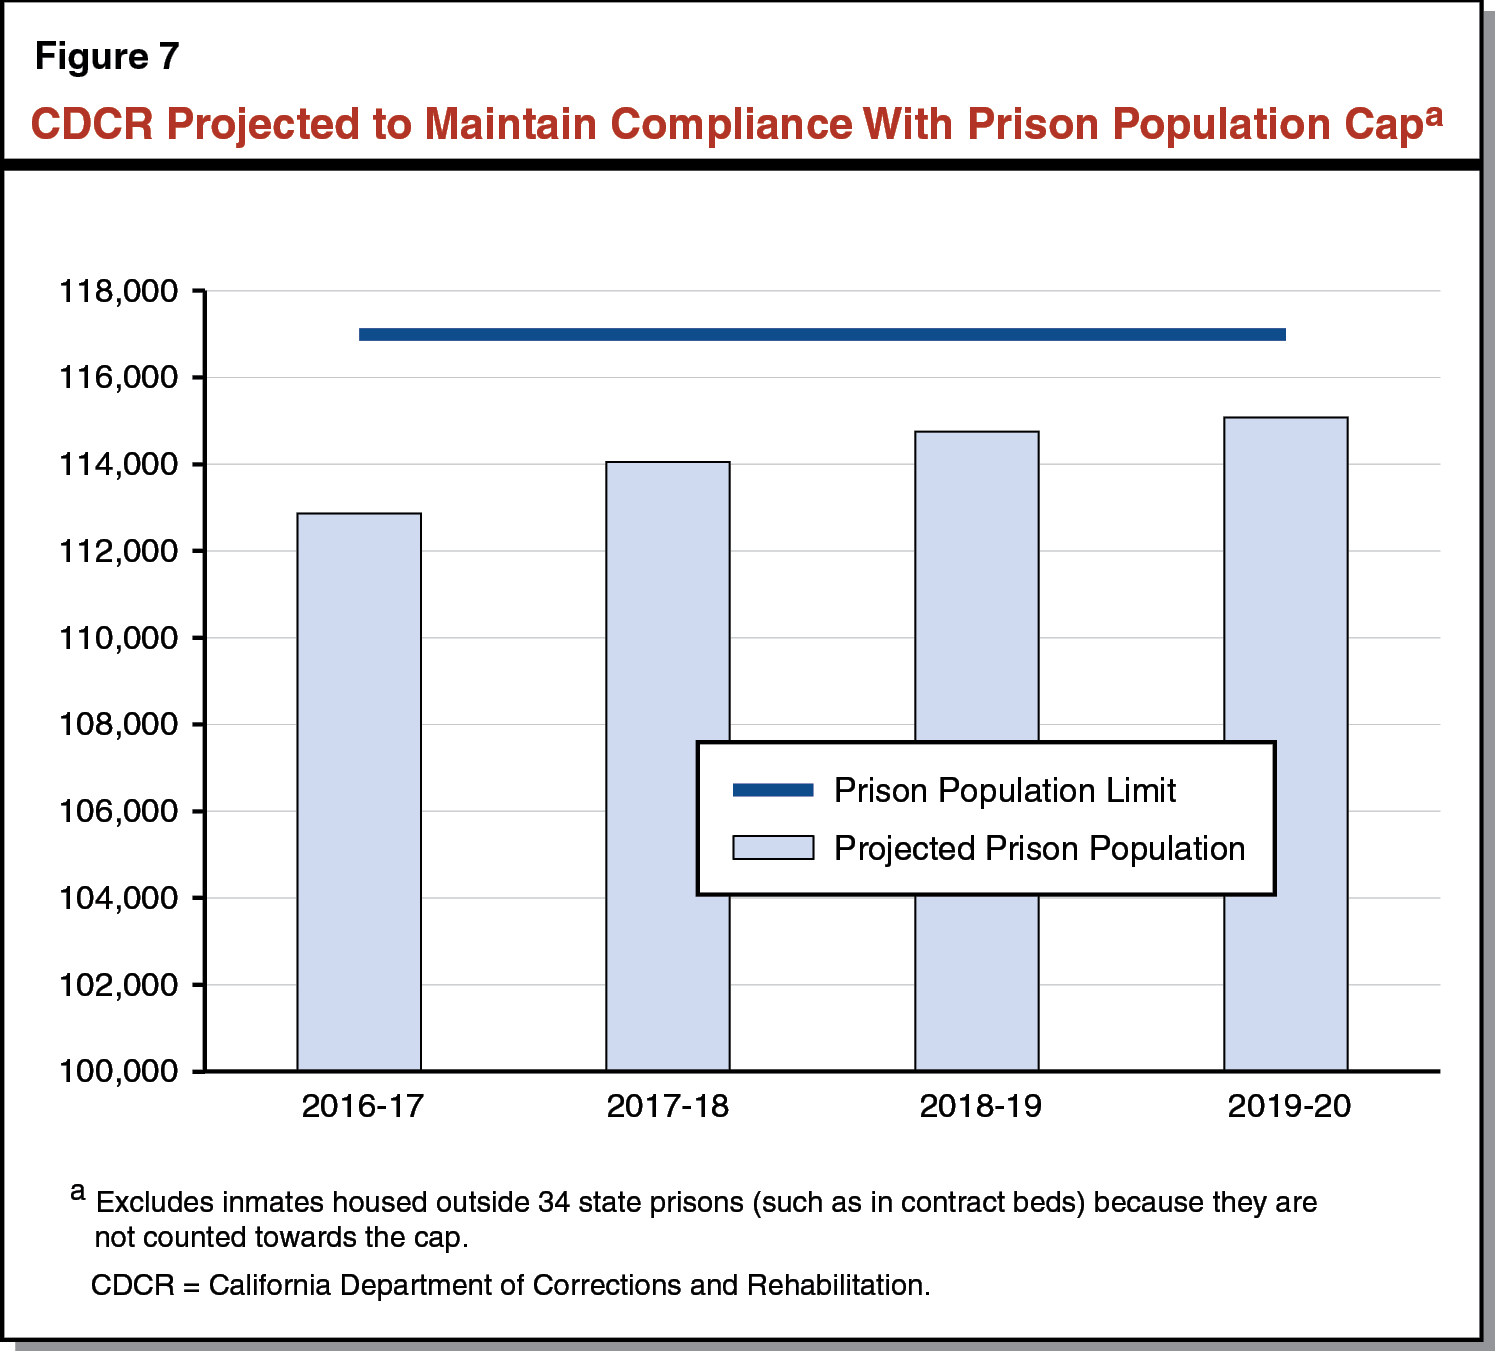 Figure 7 - CDCR Projected to Maintain Compliance With Prison Population Cap